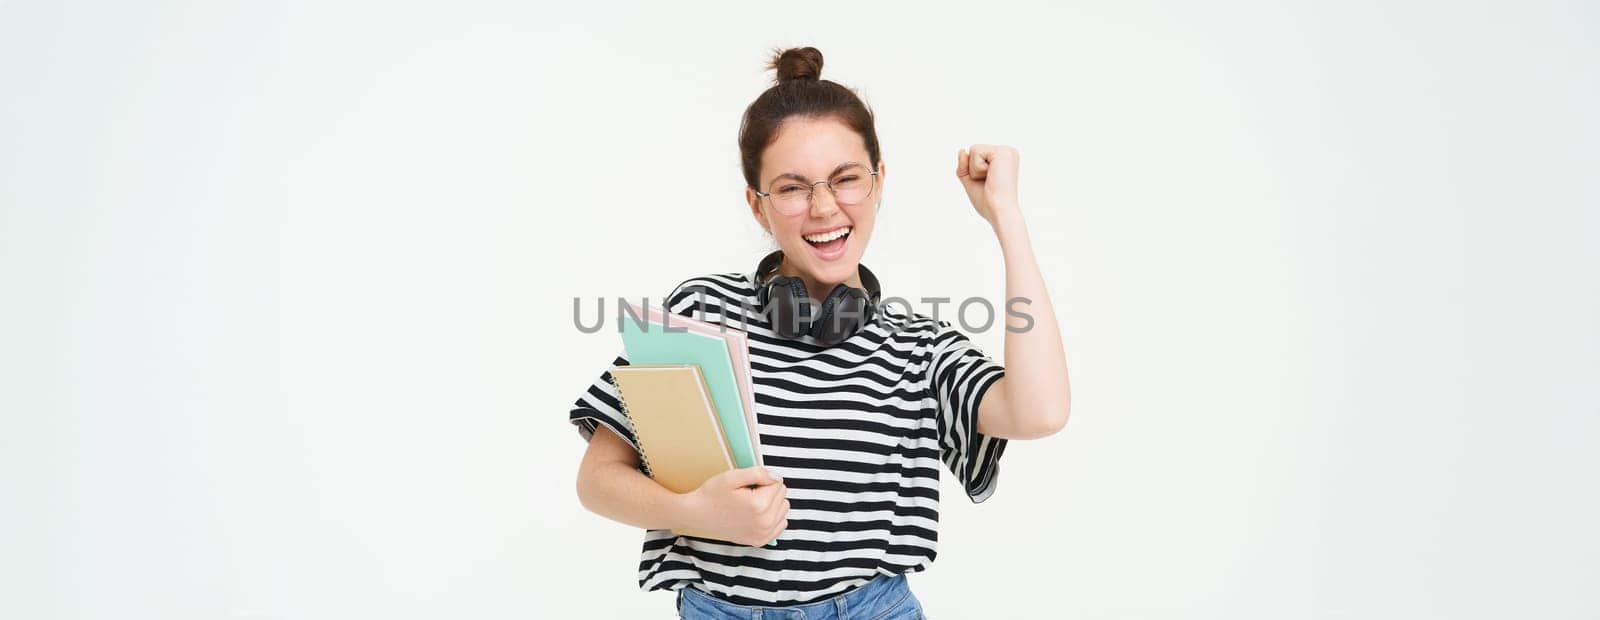 Enthusiastic young woman in glasses, teacher celebrating, raising hand up and cheering, tirumphing with joyful smile, white background.